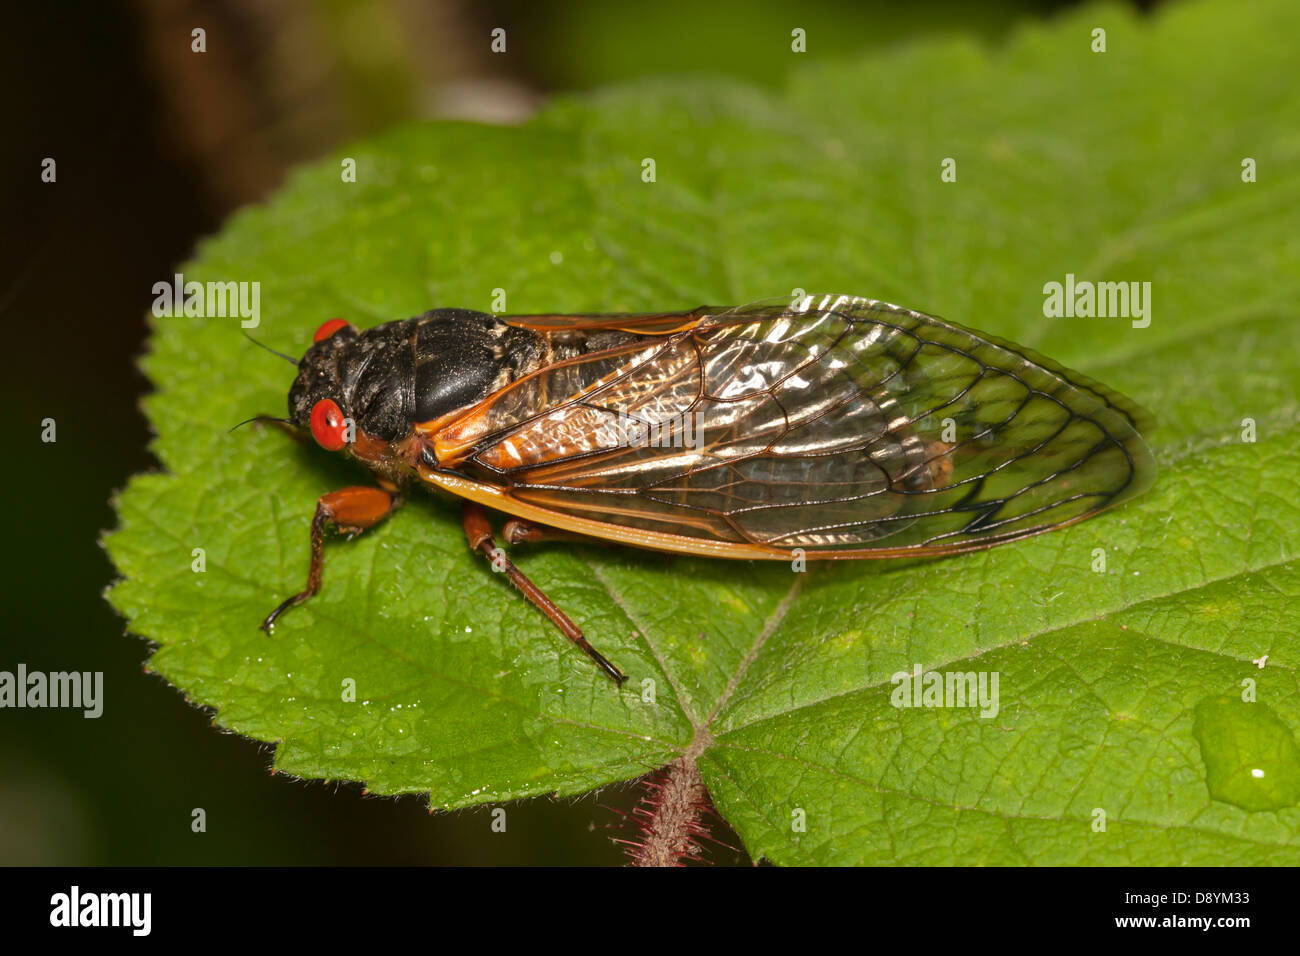 An adult Brood II 17-year periodical cicada (Magicicada septendecim) perches on vegetation after emergene from its nymphal stage Stock Photo